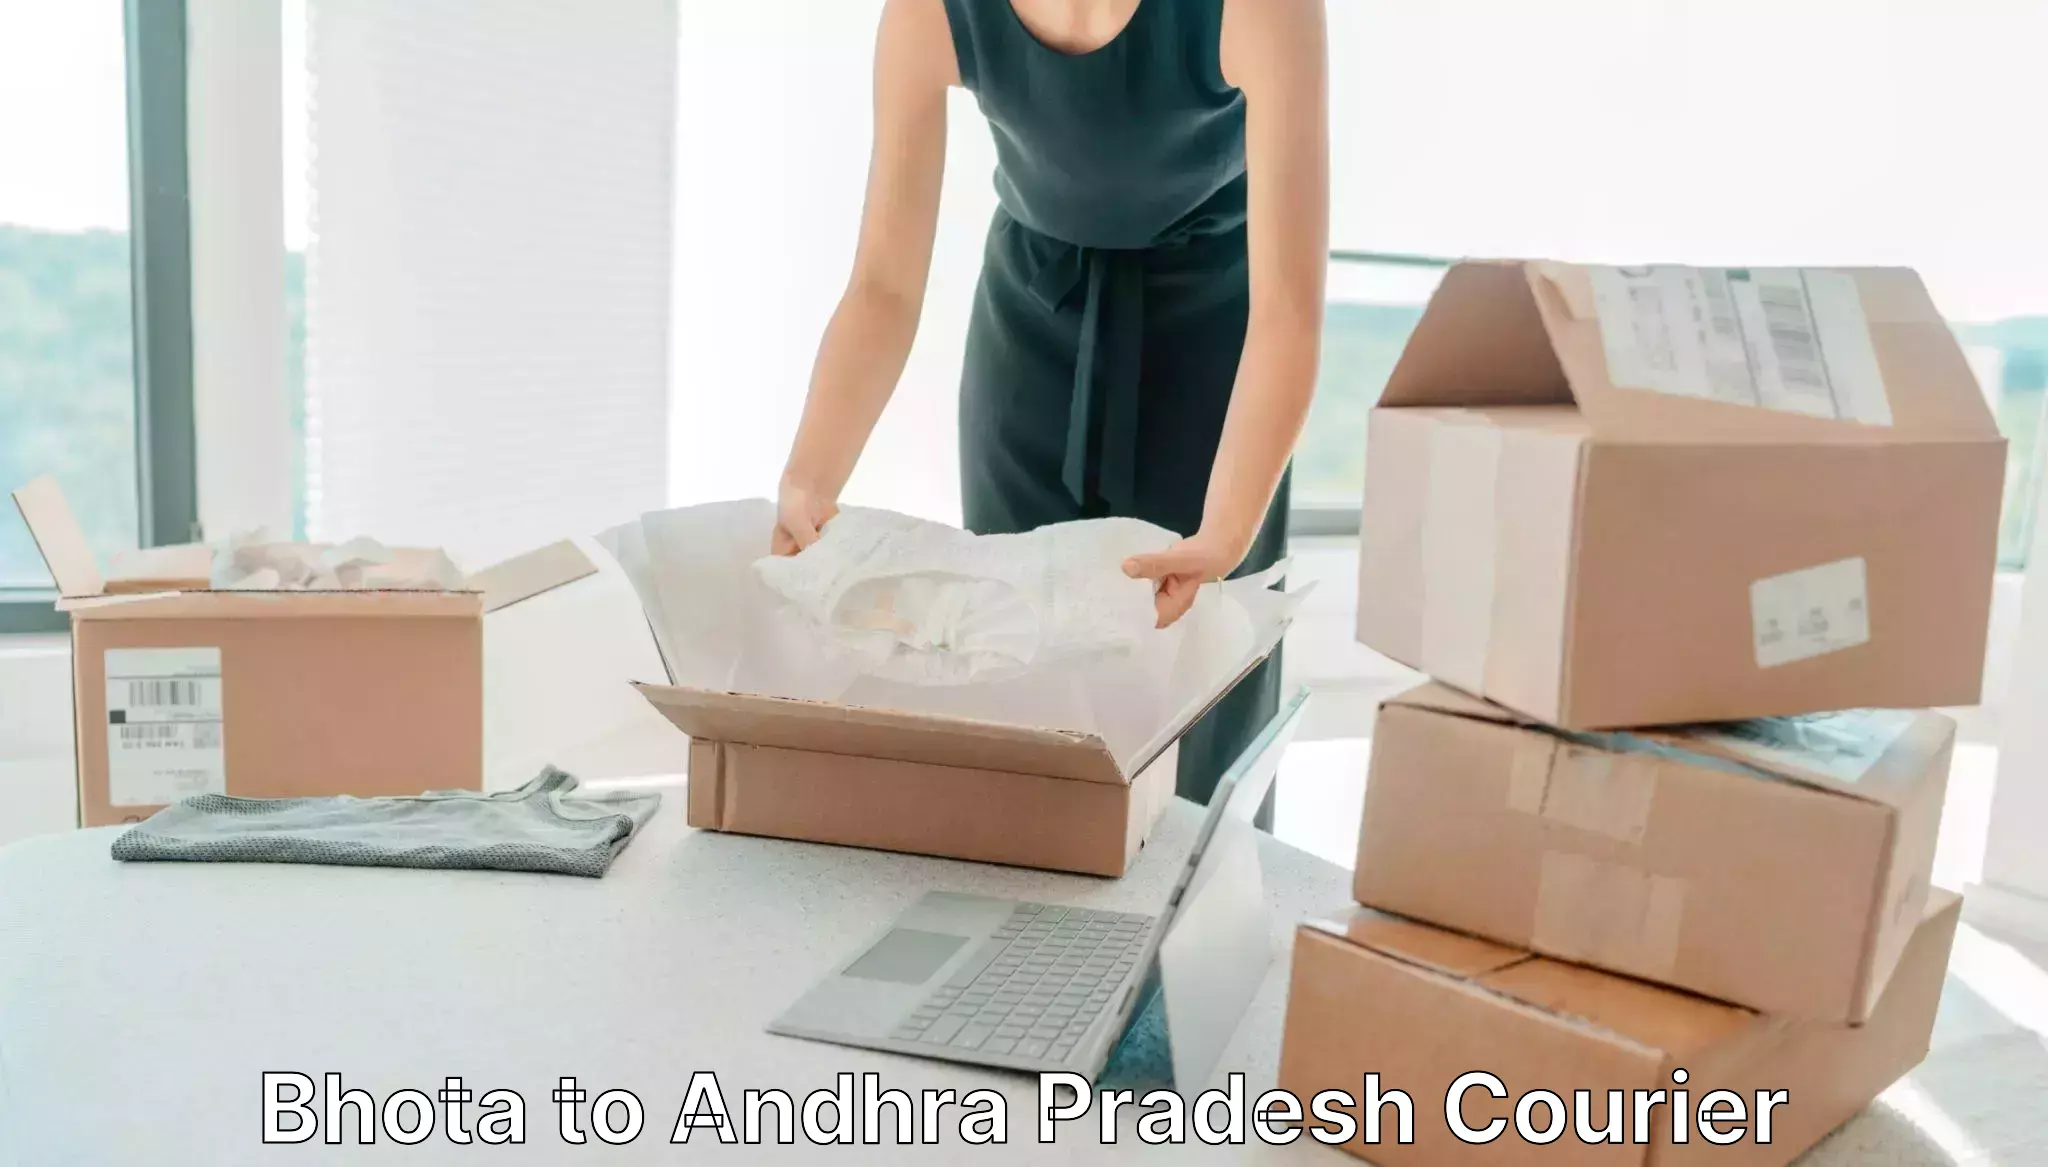 Automated shipping Bhota to Ongole